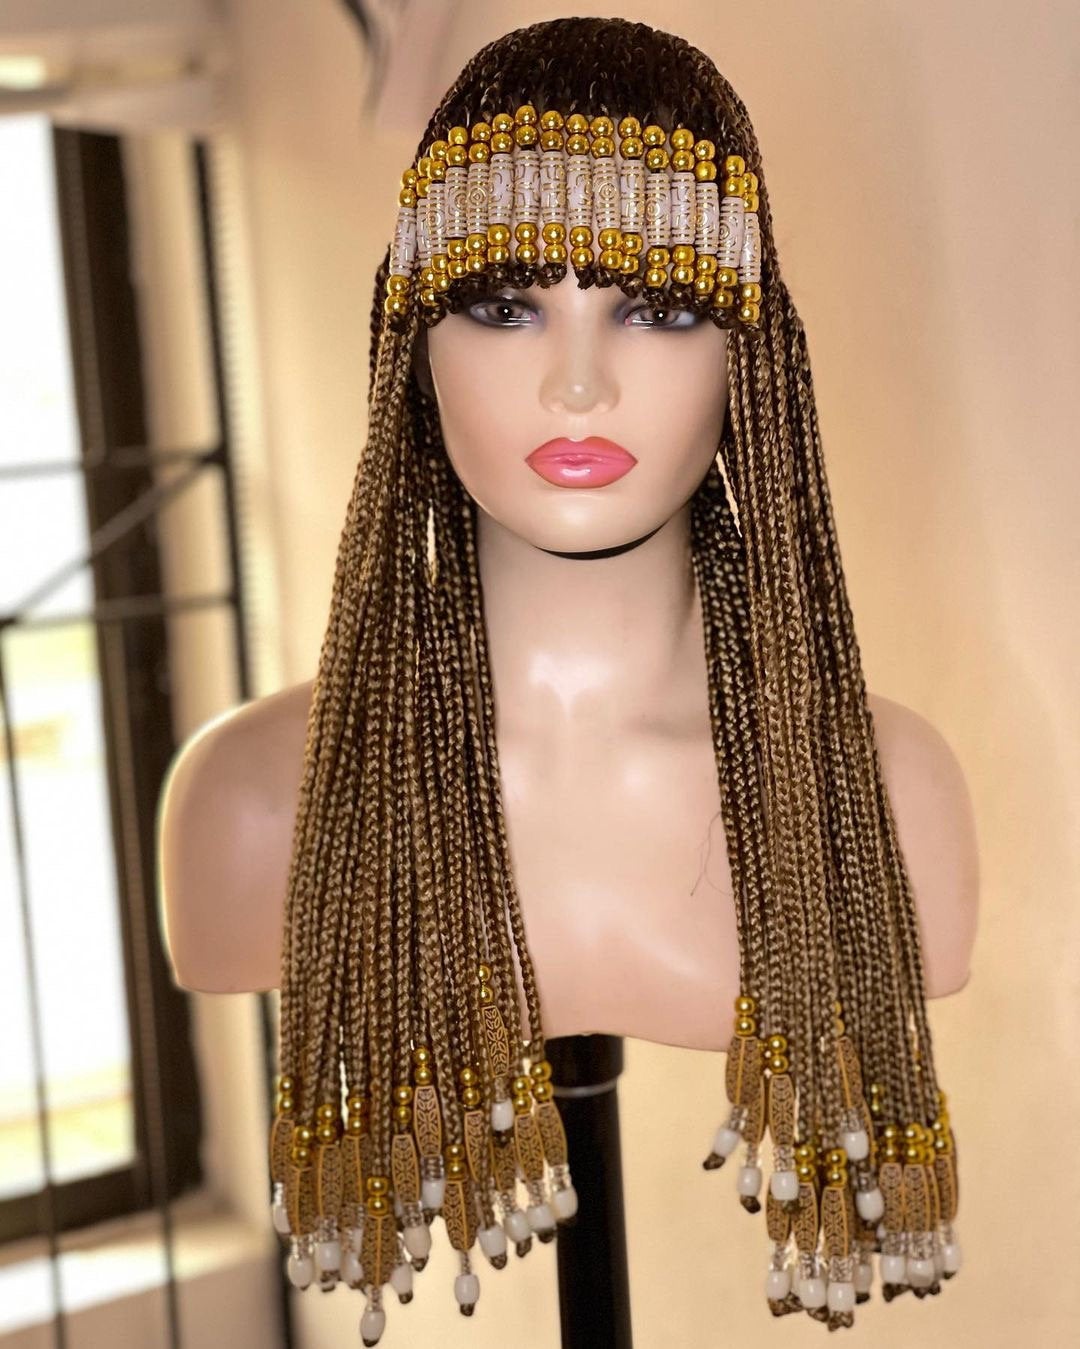 Beyonce inspired braids wig with bangs, Conrow Box braid wig, Feeding braids wig, braided wig, Conrow braided wig, Gypsy boho braids